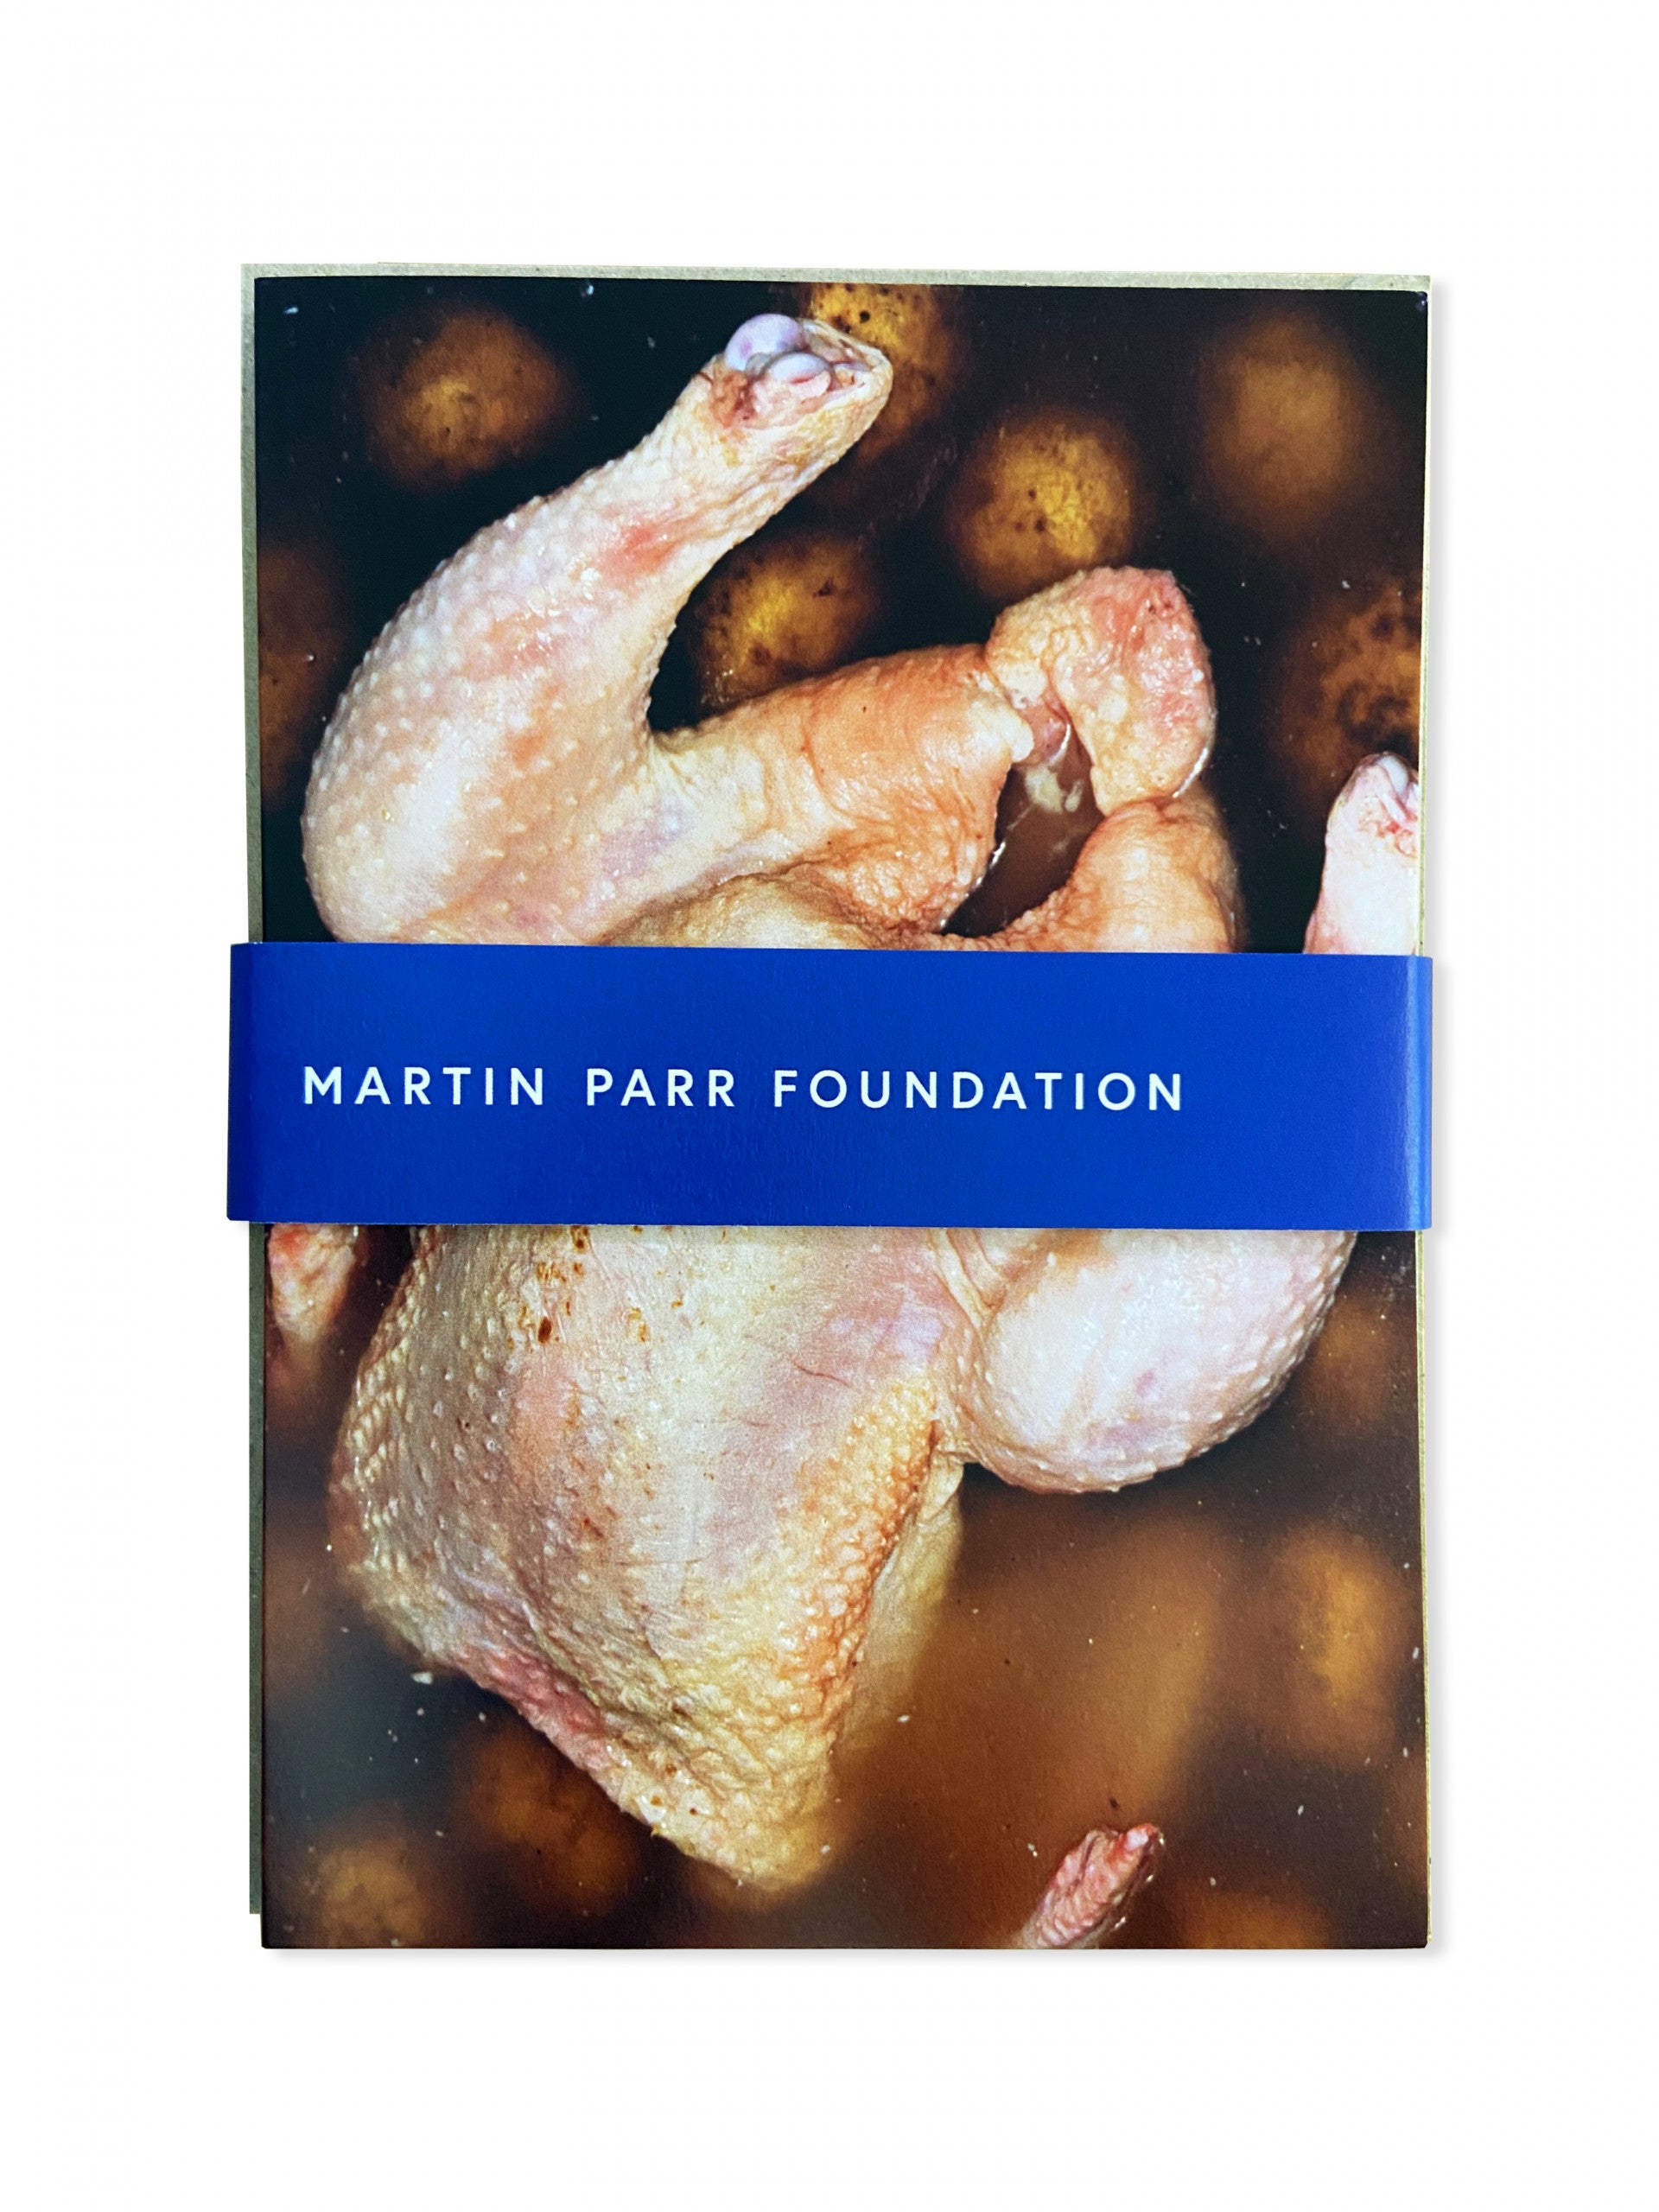 Martin Parr Christmas Cards (Poultry Edition)